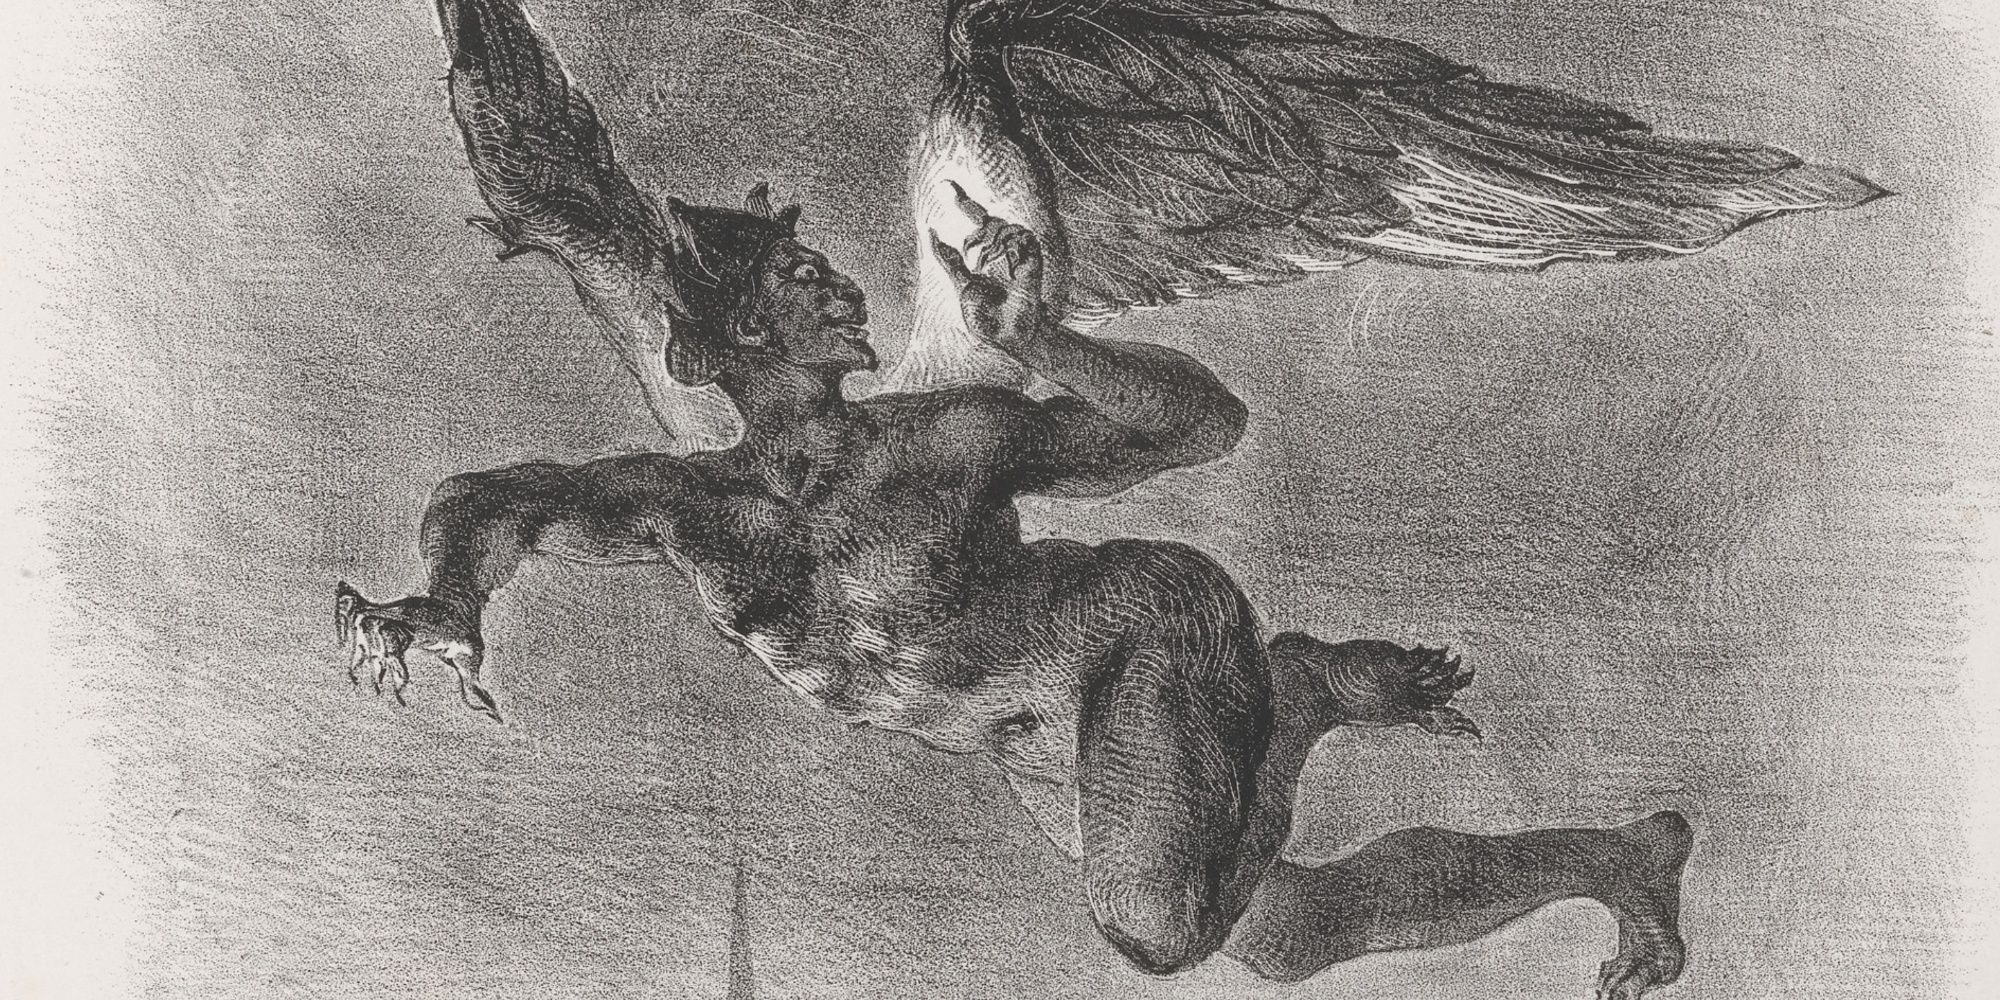 Mephistopheles flying over Wittenberg, in a lithograph by Eugène Delacroix cropped